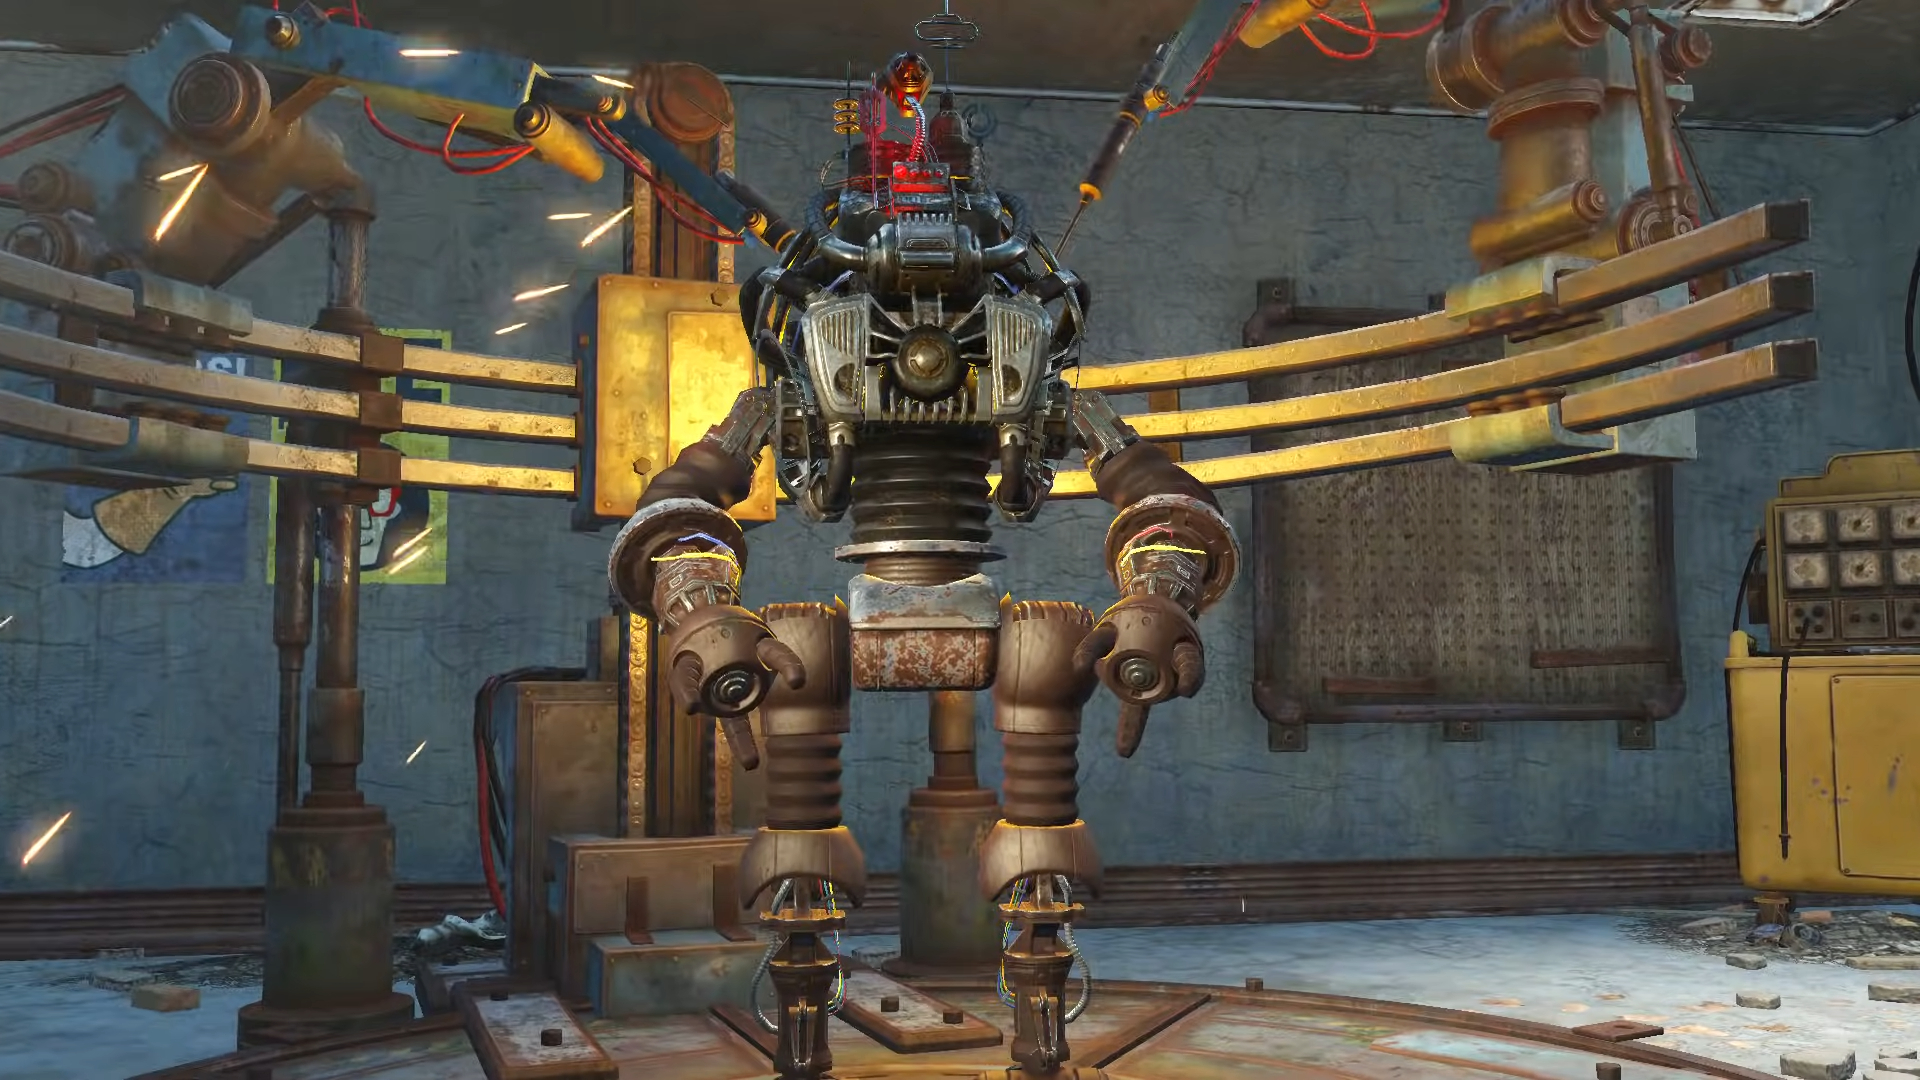 A robot being built in Fallout 4.